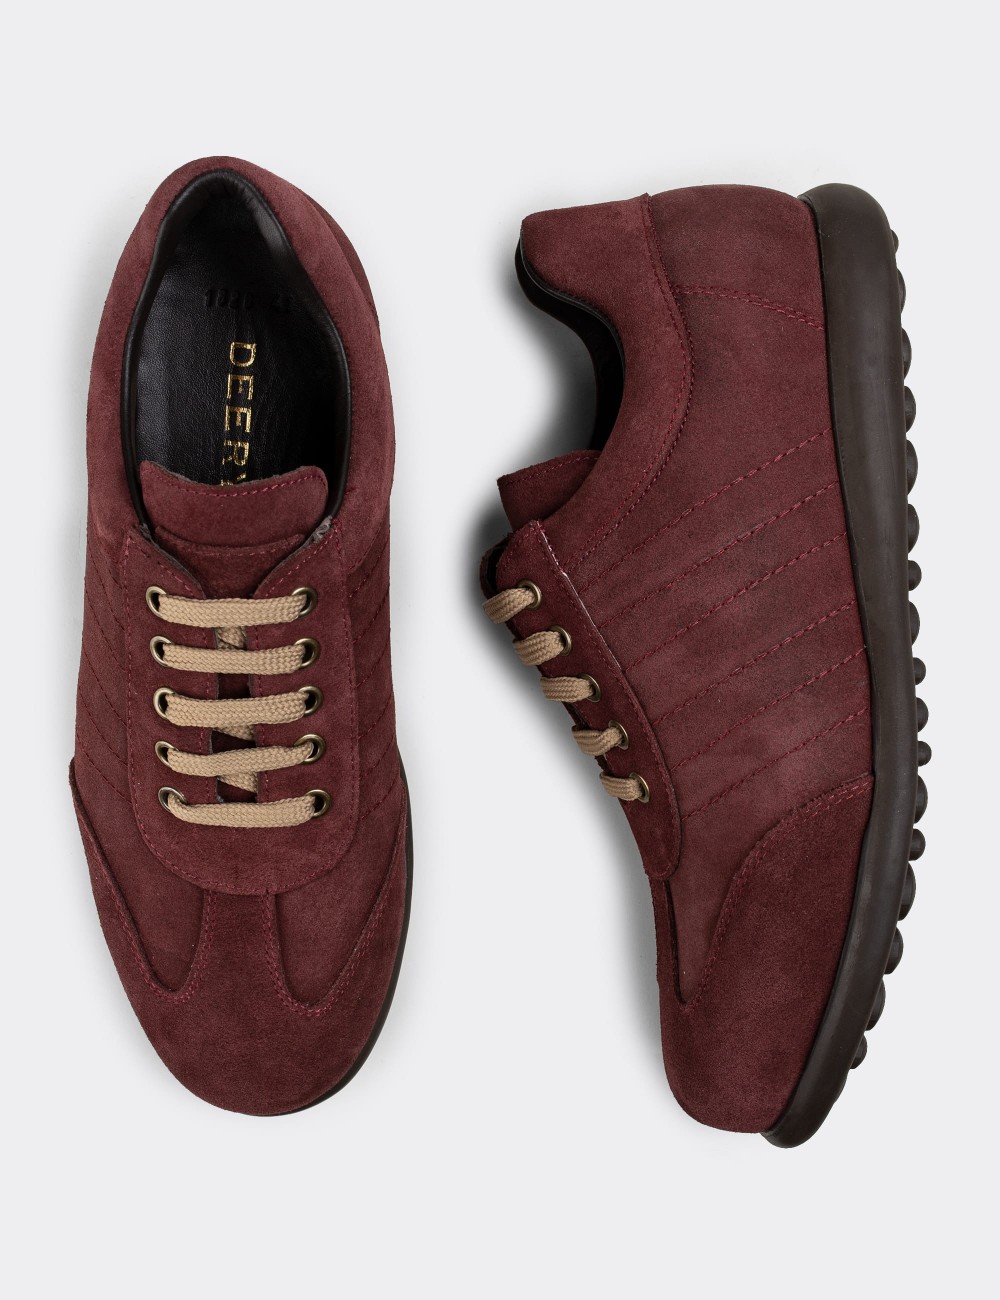 Burgundy Suede Leather Lace-up Shoes - 01826MBRDC02